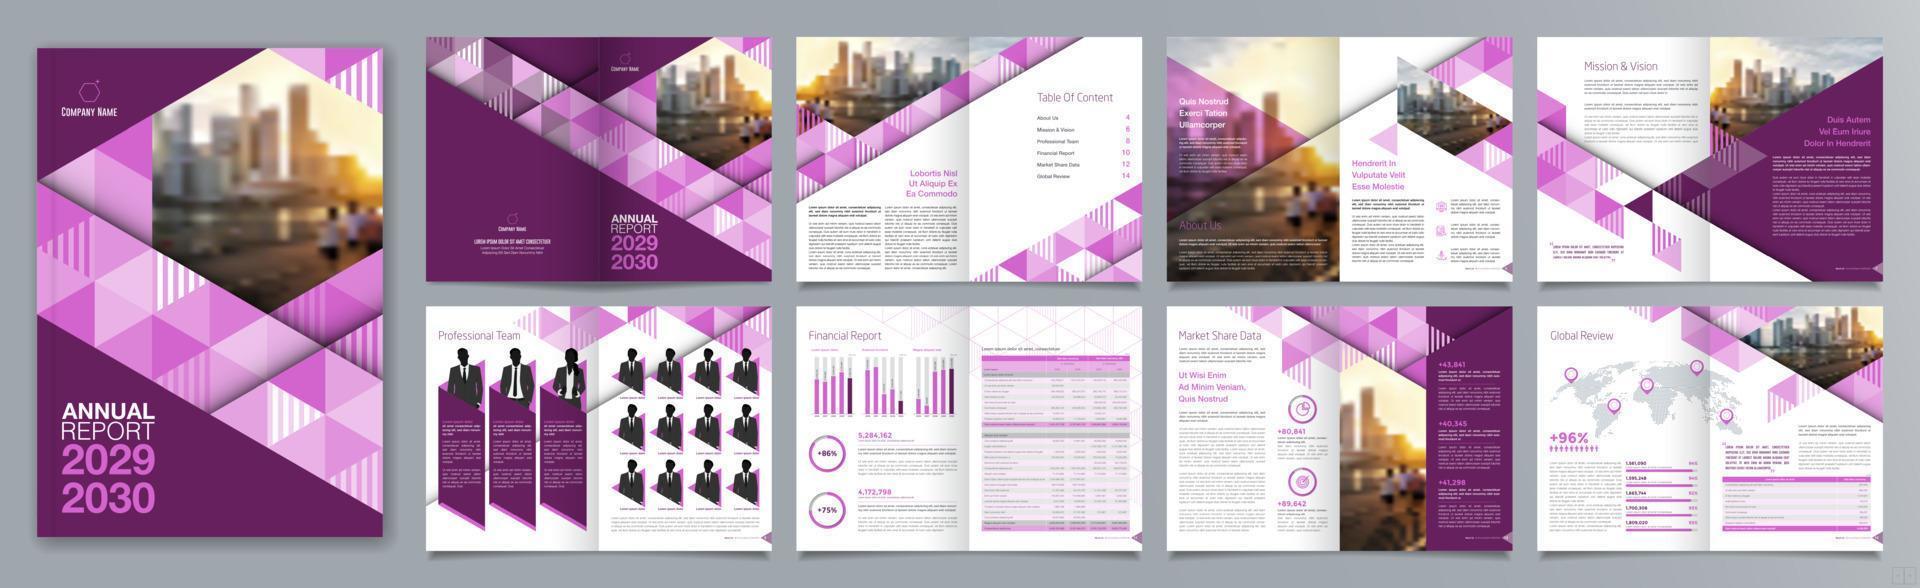 Corporate business presentation guide brochure template, Annual report, 16 page minimalist flat geometric business brochure design template, A4 size. vector